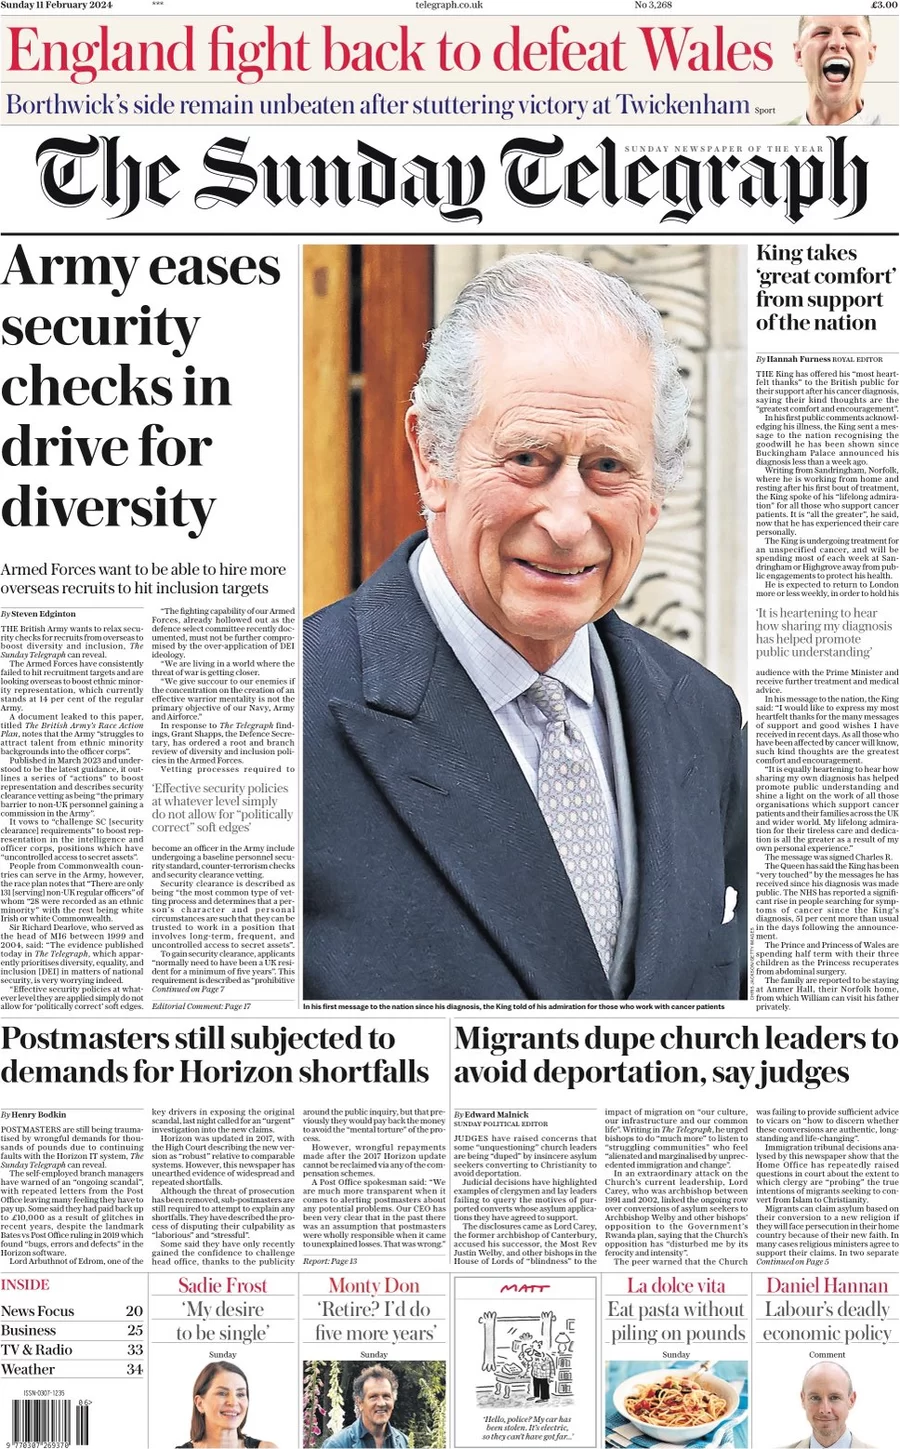 the daily telegraph 000845944 - WTX News Breaking News, fashion & Culture from around the World - Daily News Briefings -Finance, Business, Politics & Sports News